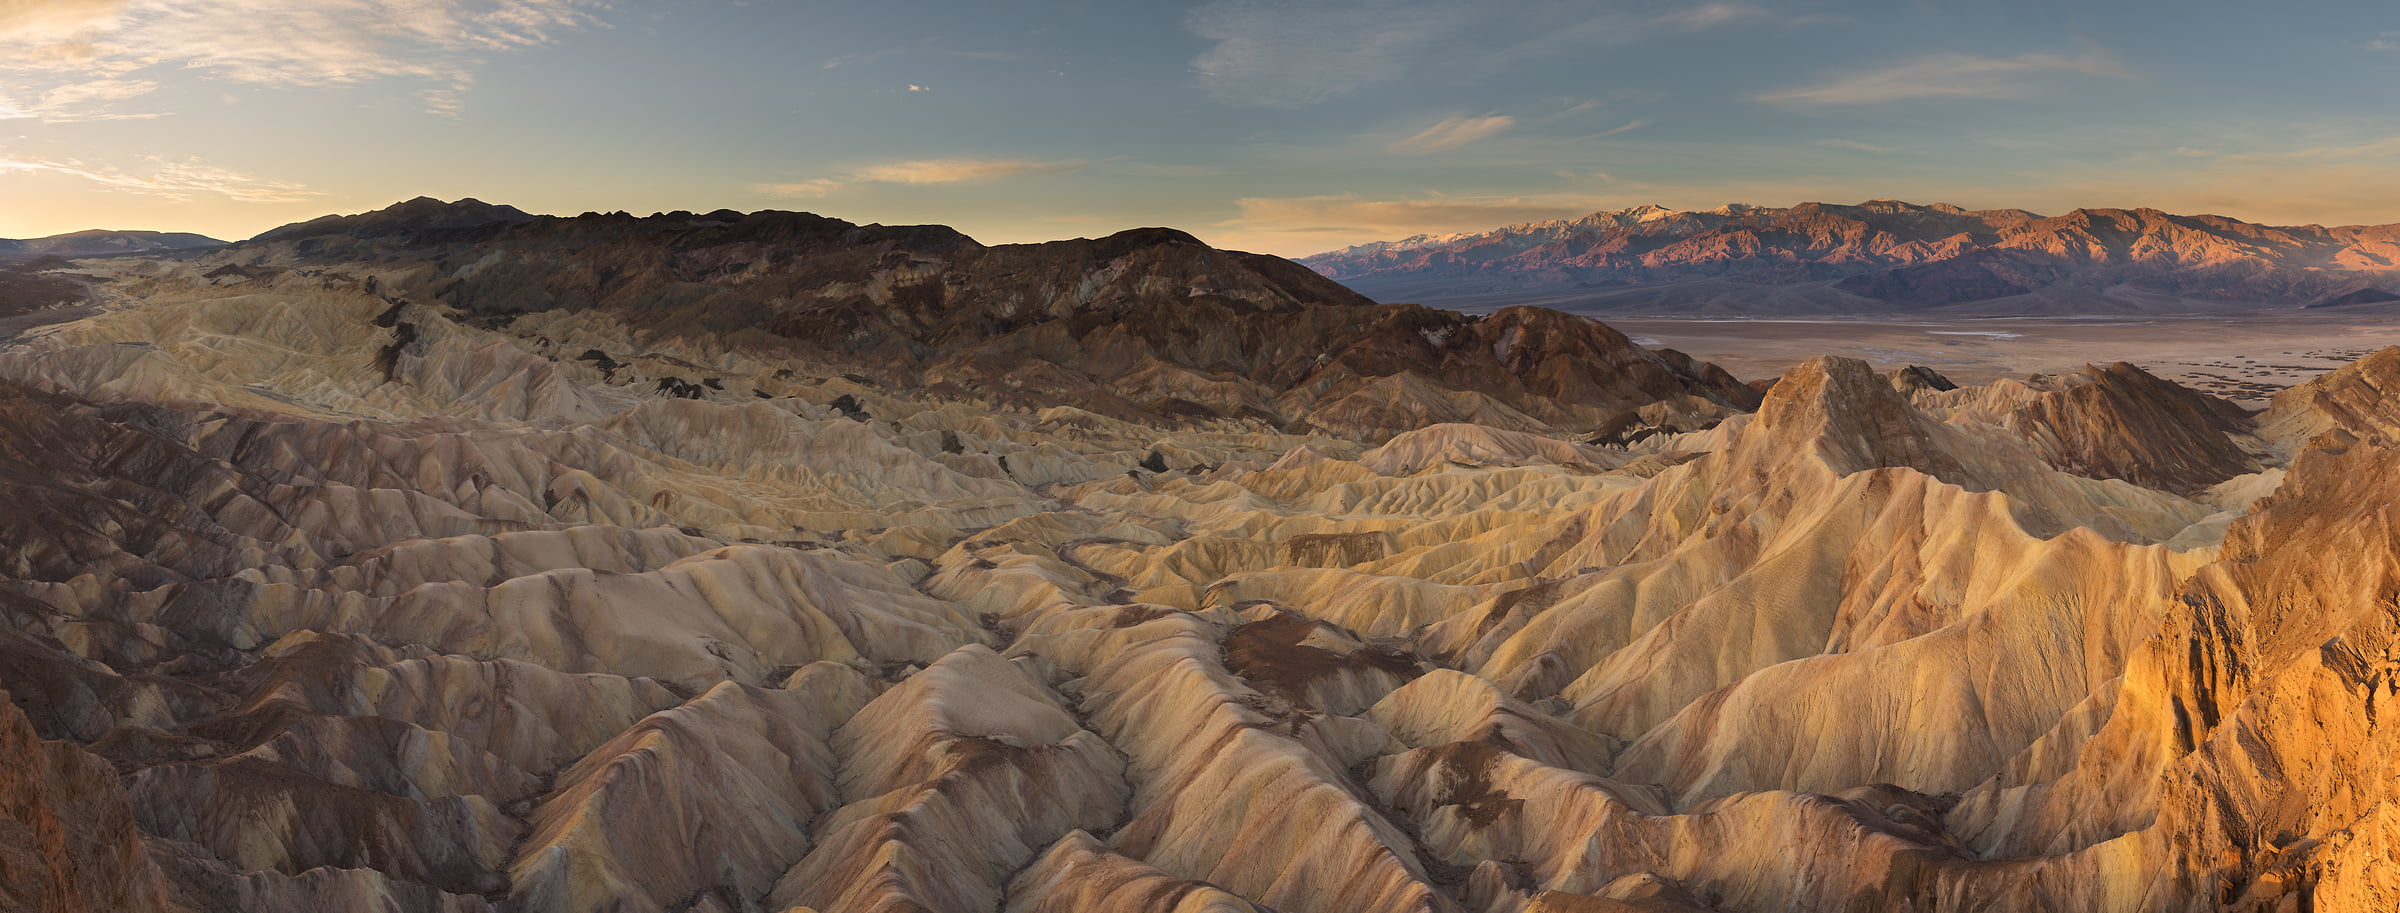 1,245 megapixels! A very high resolution, large-format VAST photo print of Death Valley from Zabriskie Point; fine art landscape photo created by Guido Brandt in Death Valley National Park, California